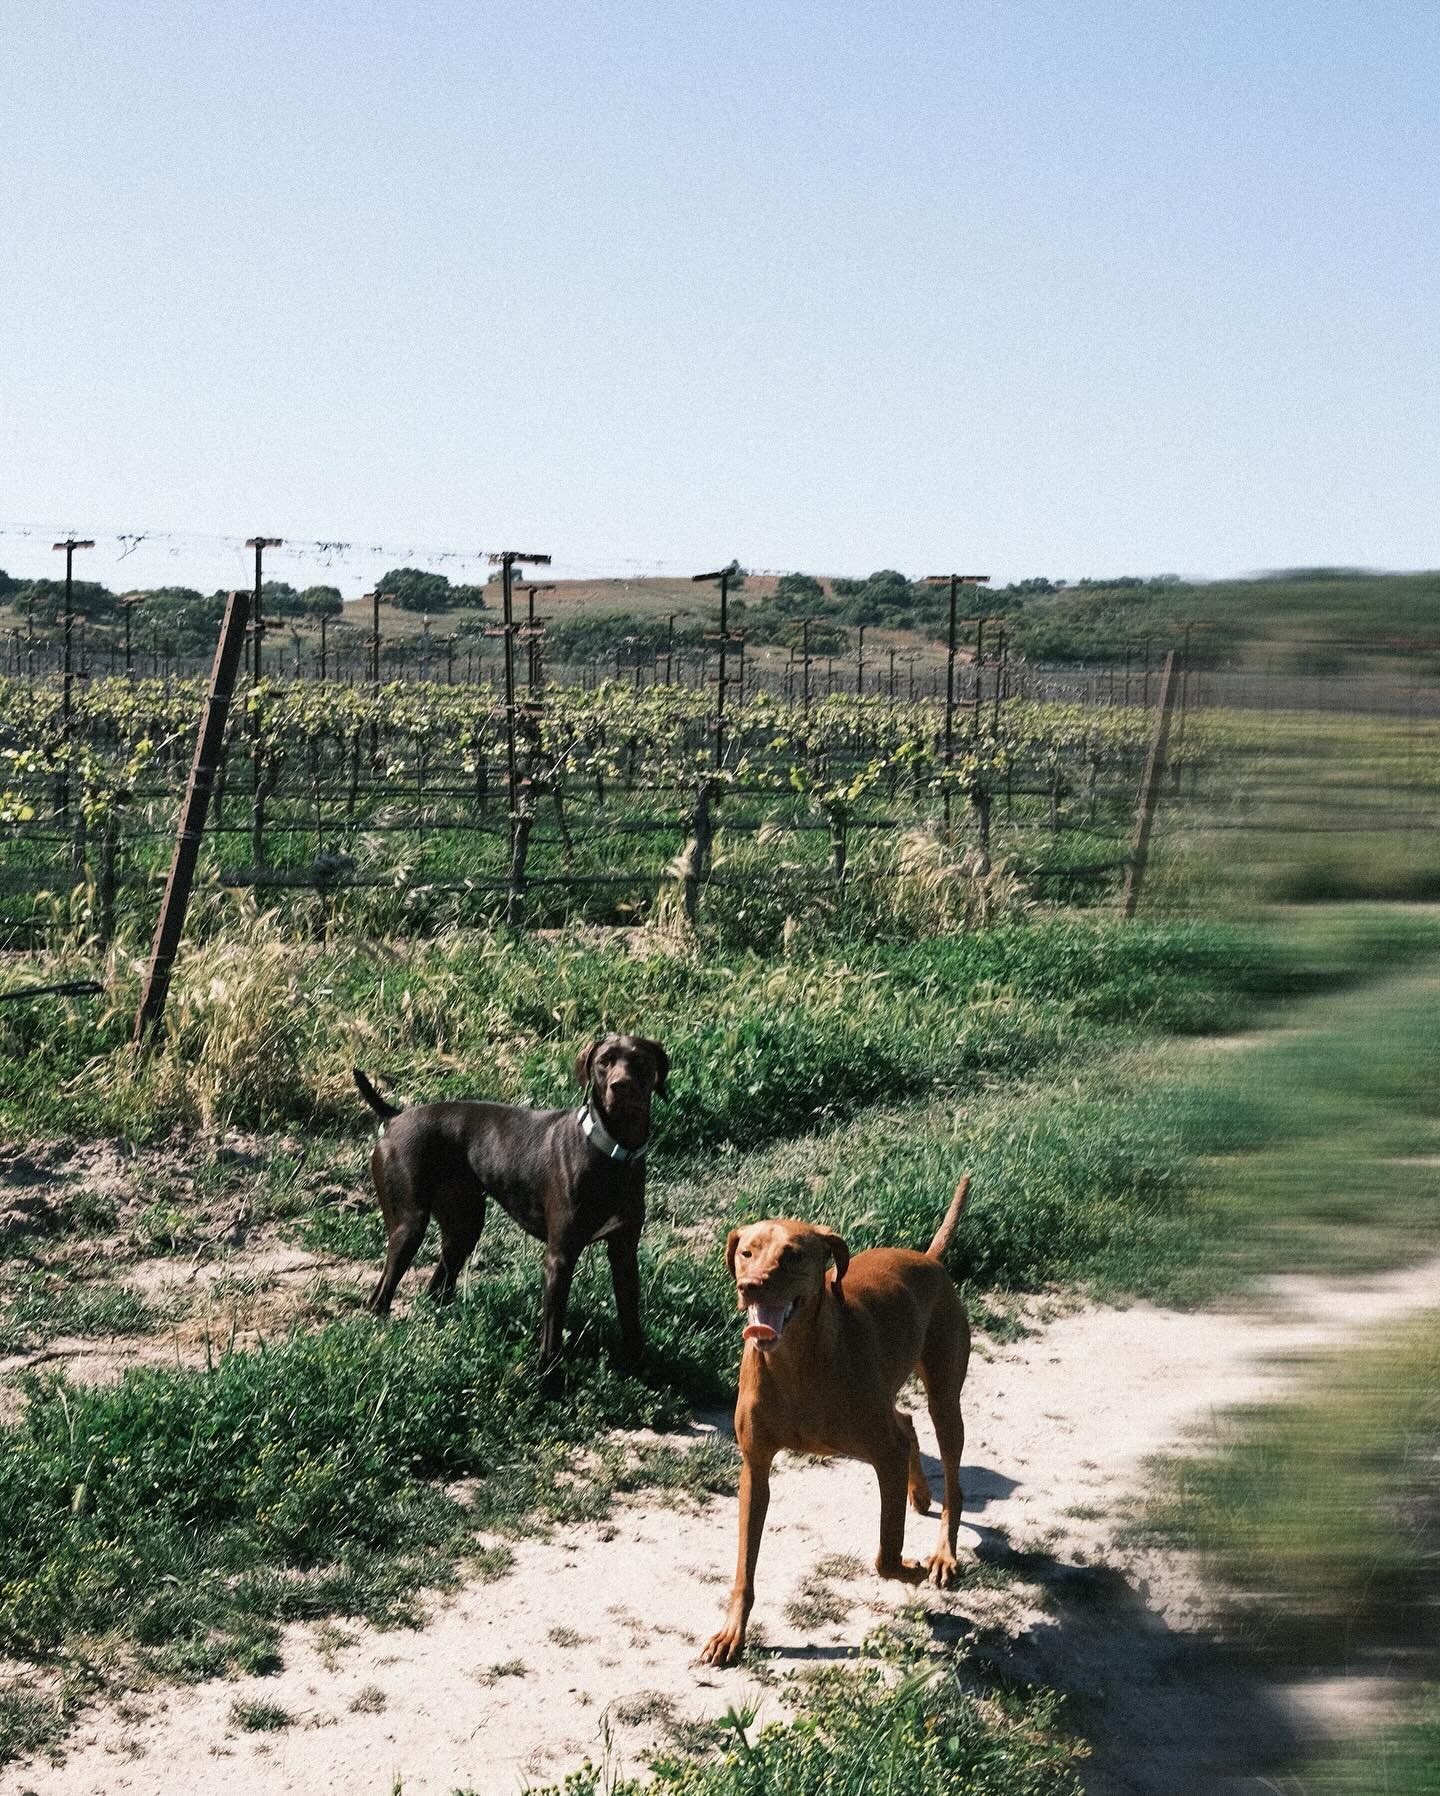 Maggie &amp; Lotti say it&rsquo;s a good day to drink wine! We&rsquo;re open in the Arts District 12-9 for glasses and tastings. Photo from Thursday on @paliwineco vineyard, where we are lucky to source many of our grapes from. @paliwineco has been f